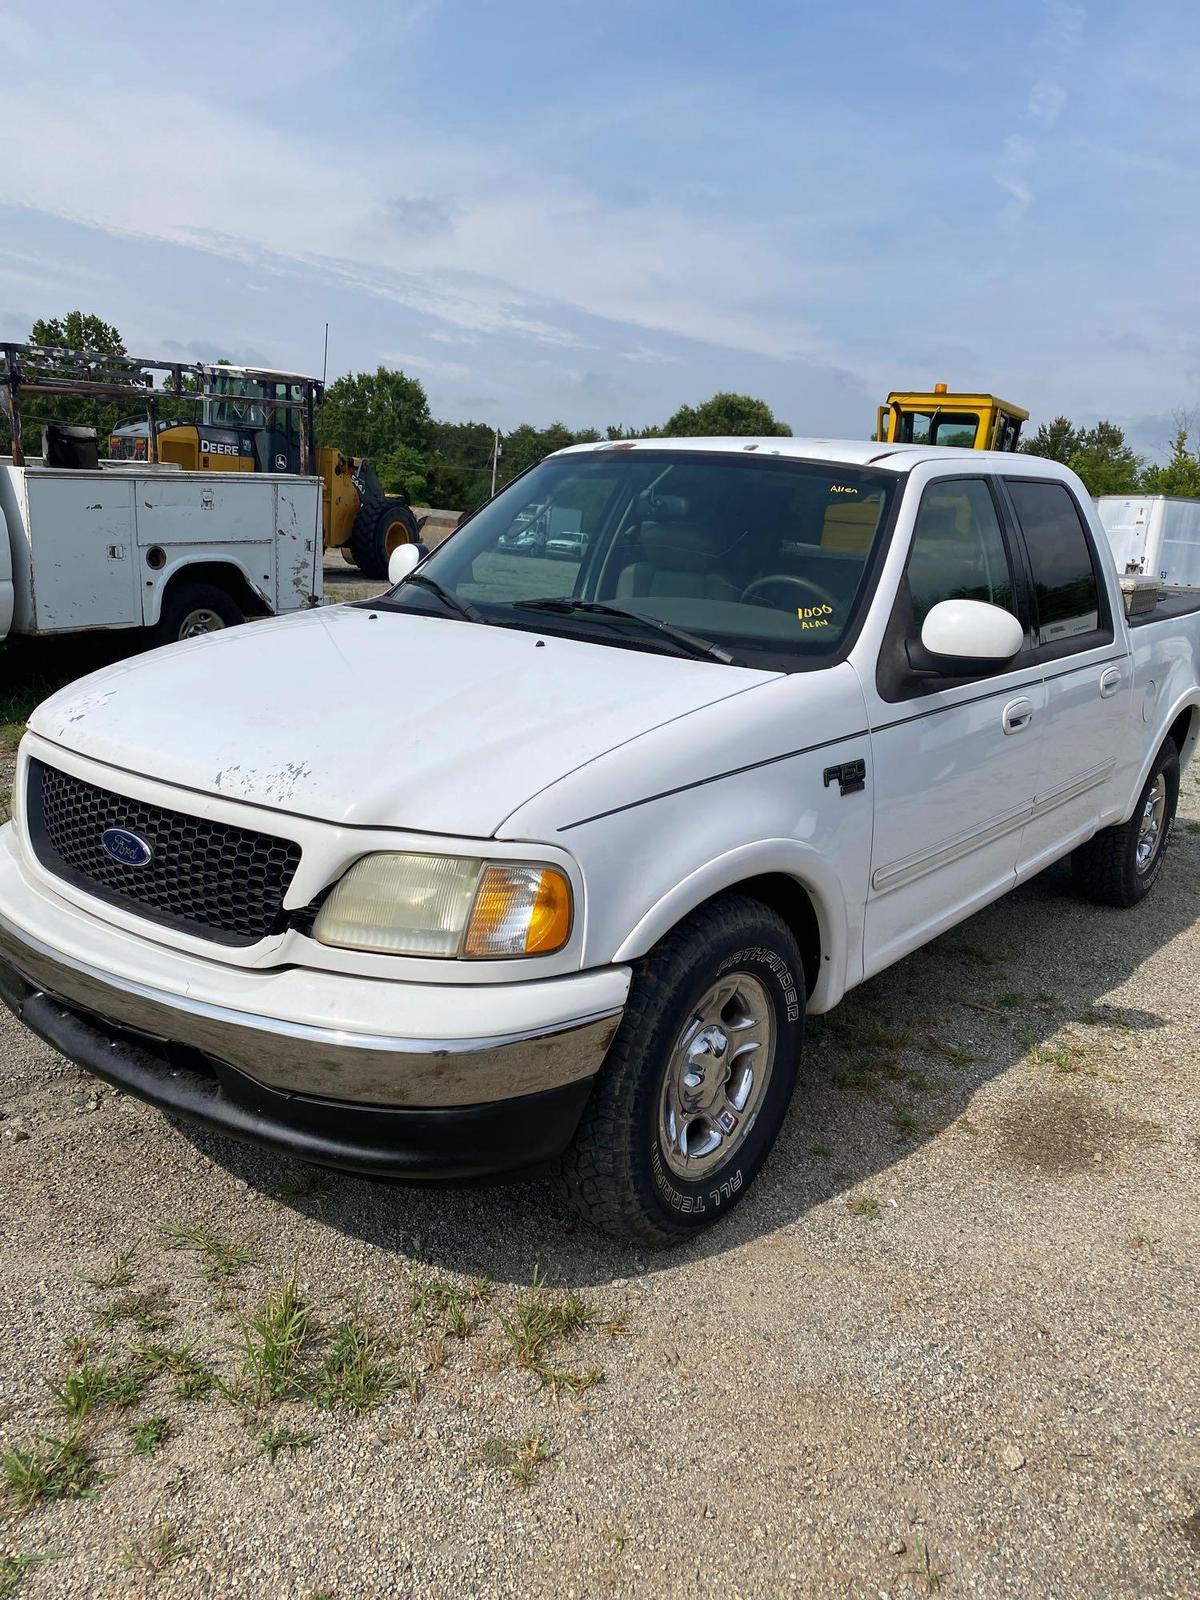 2003 Ford F-150 Crew Cab Pick-up Truck